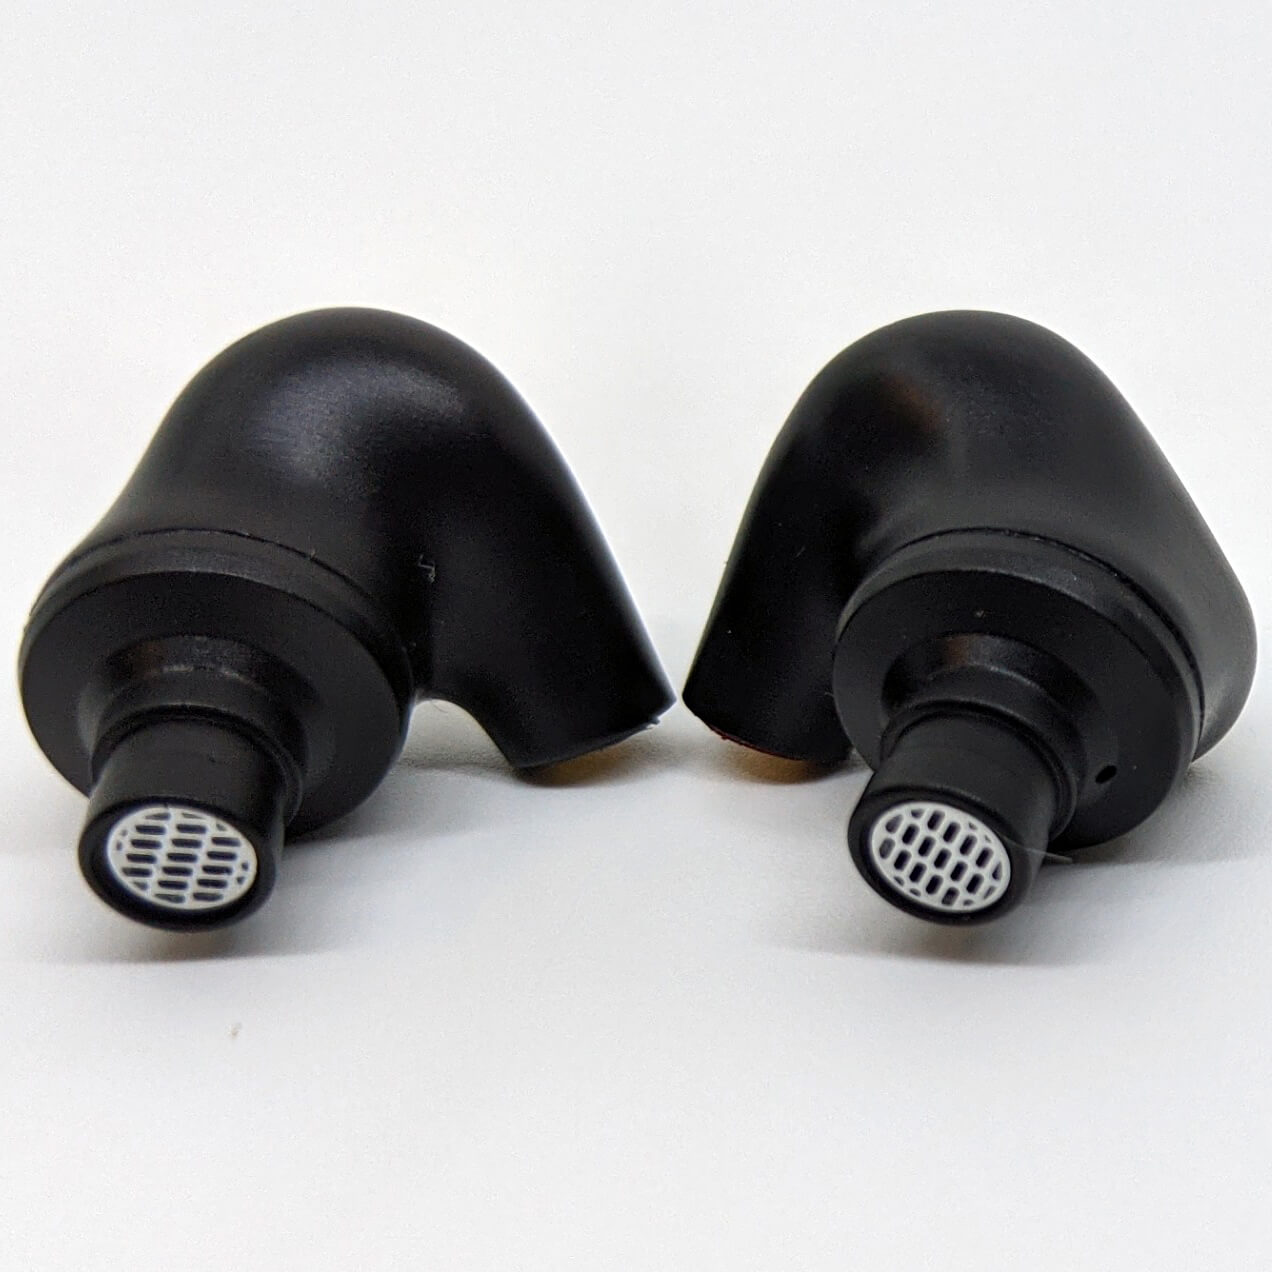 Buy BGVP DN2 Earphone at HiFiNage in India with warranty.